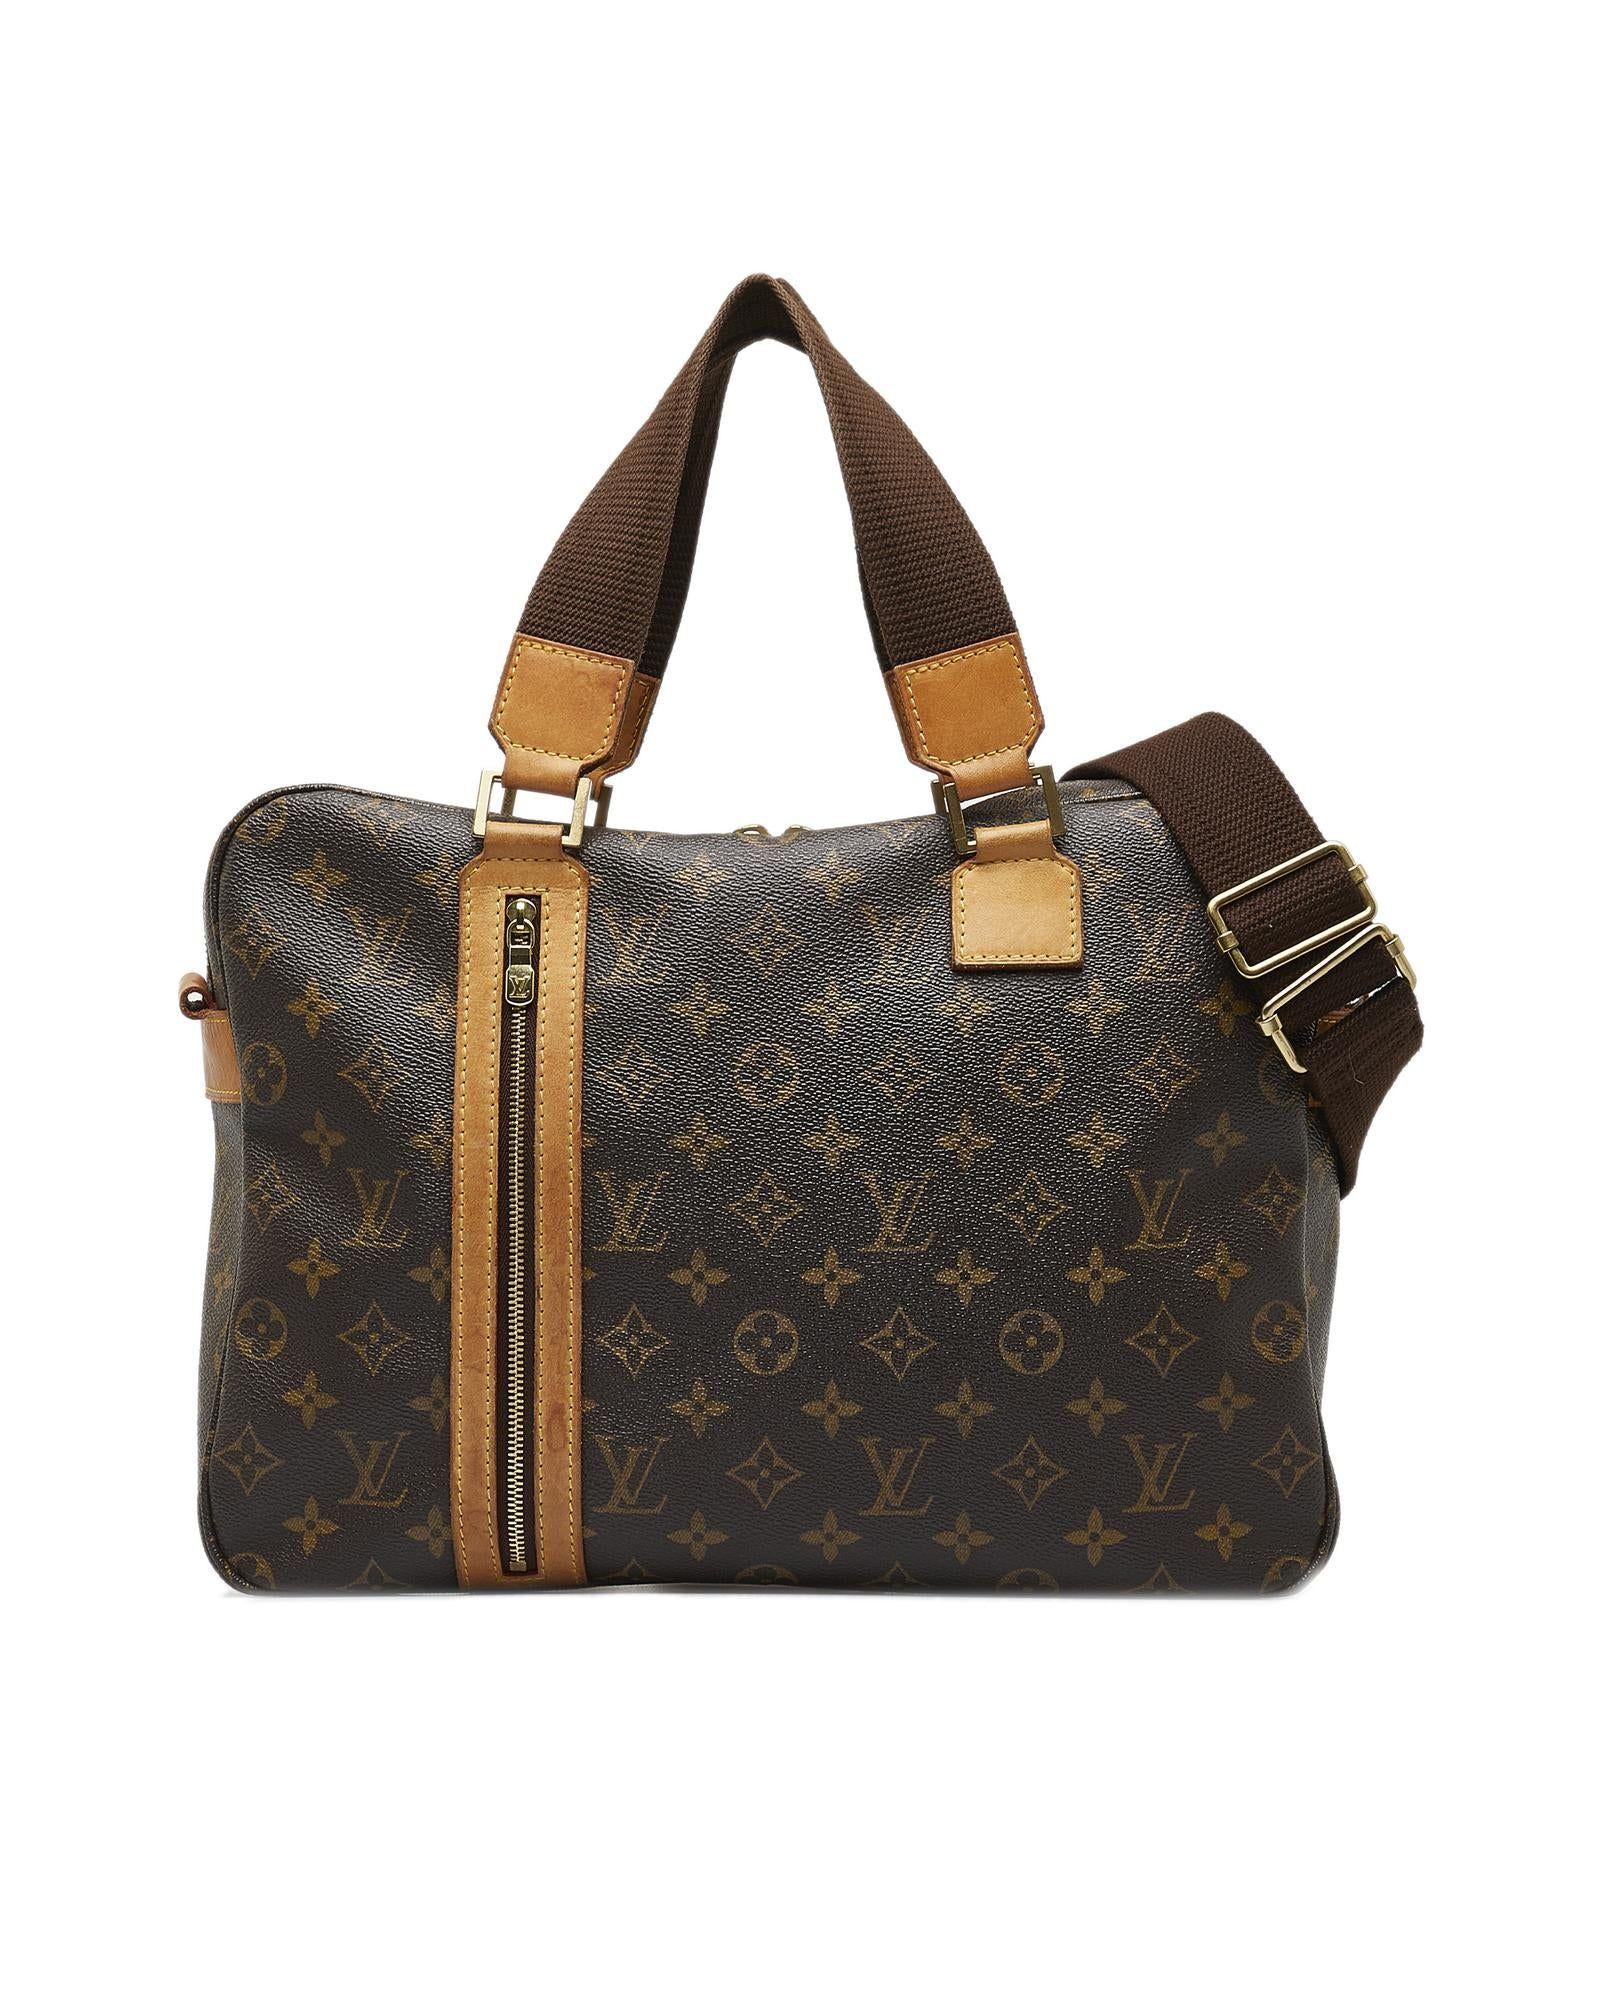 Louis Vuitton Canvas Sac With Leather Trim And Multiple Pockets in